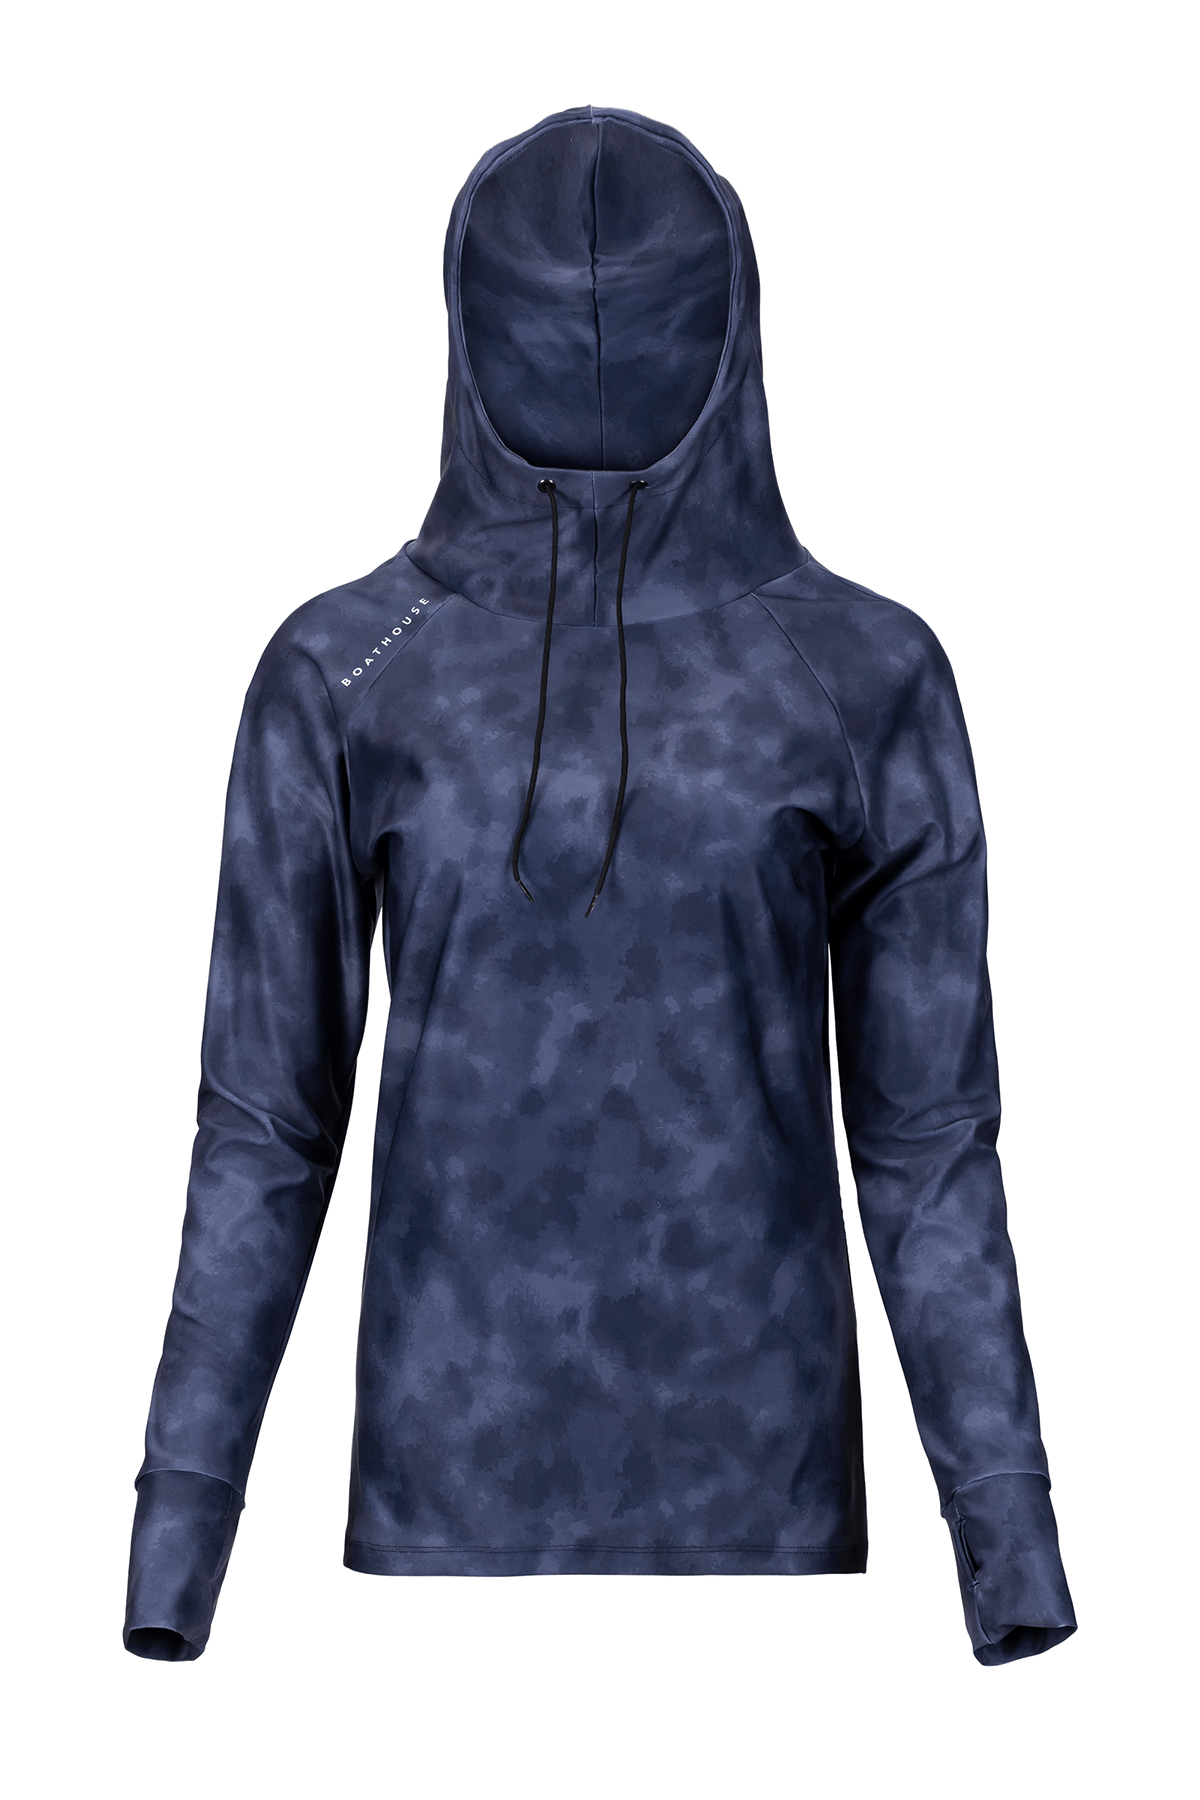 Women's Denim Wash Hooded Compression Top Navy / Small